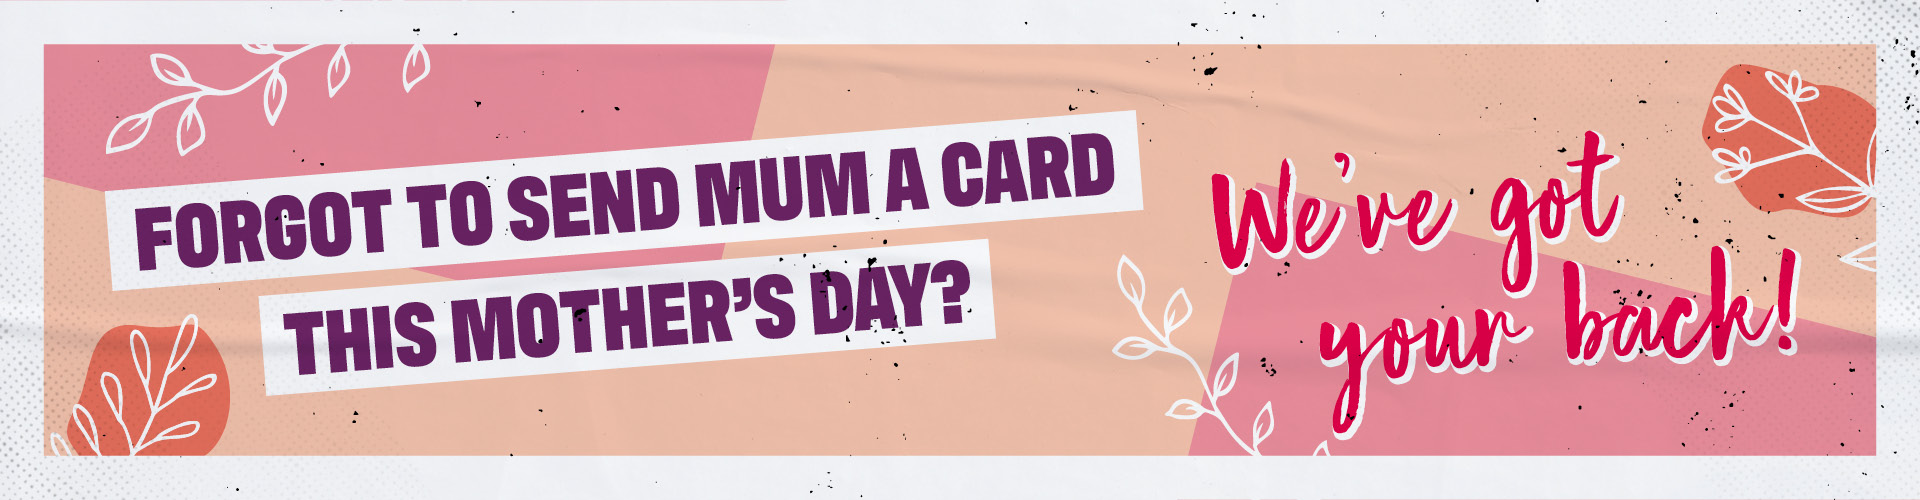 Forgot to send Mum a card this Mother's Day? We've got your back!